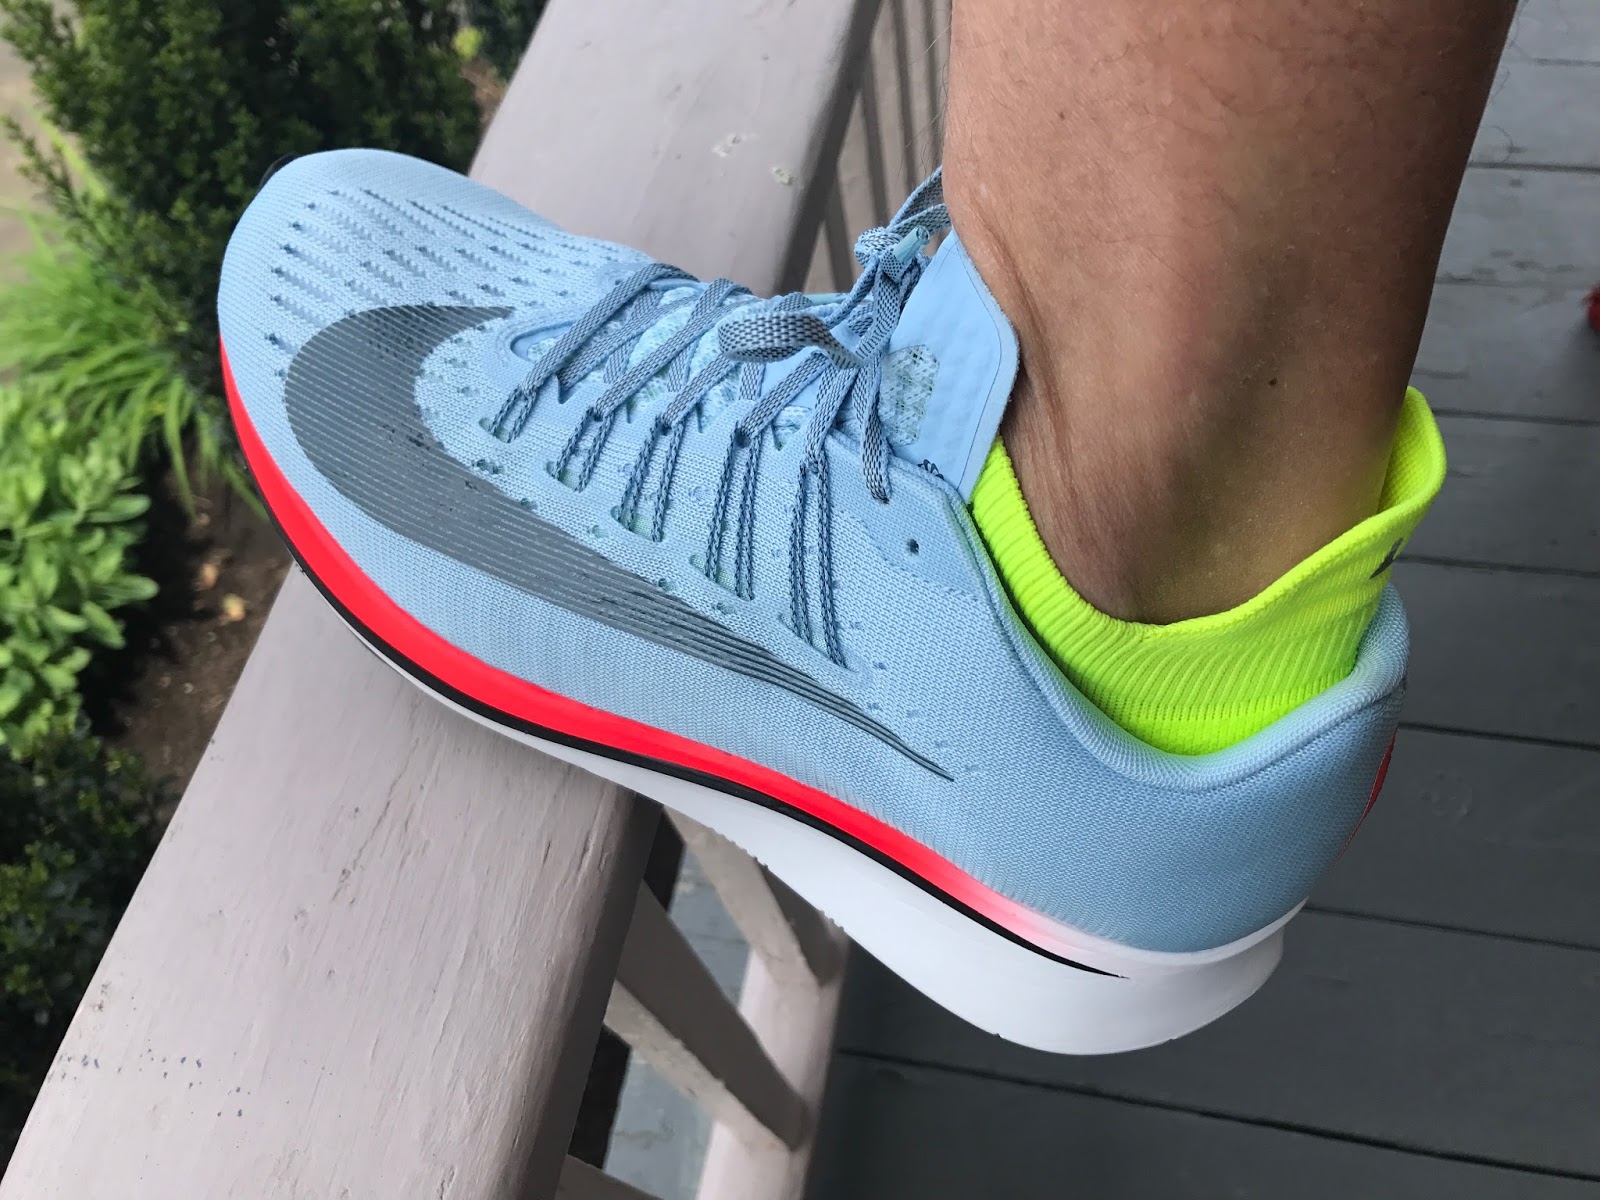 enchufe No pretencioso asistente Road Trail Run: Nike Zoom Fly Flyknit Initial Road Test Review: Zoom Fly  2.5%?